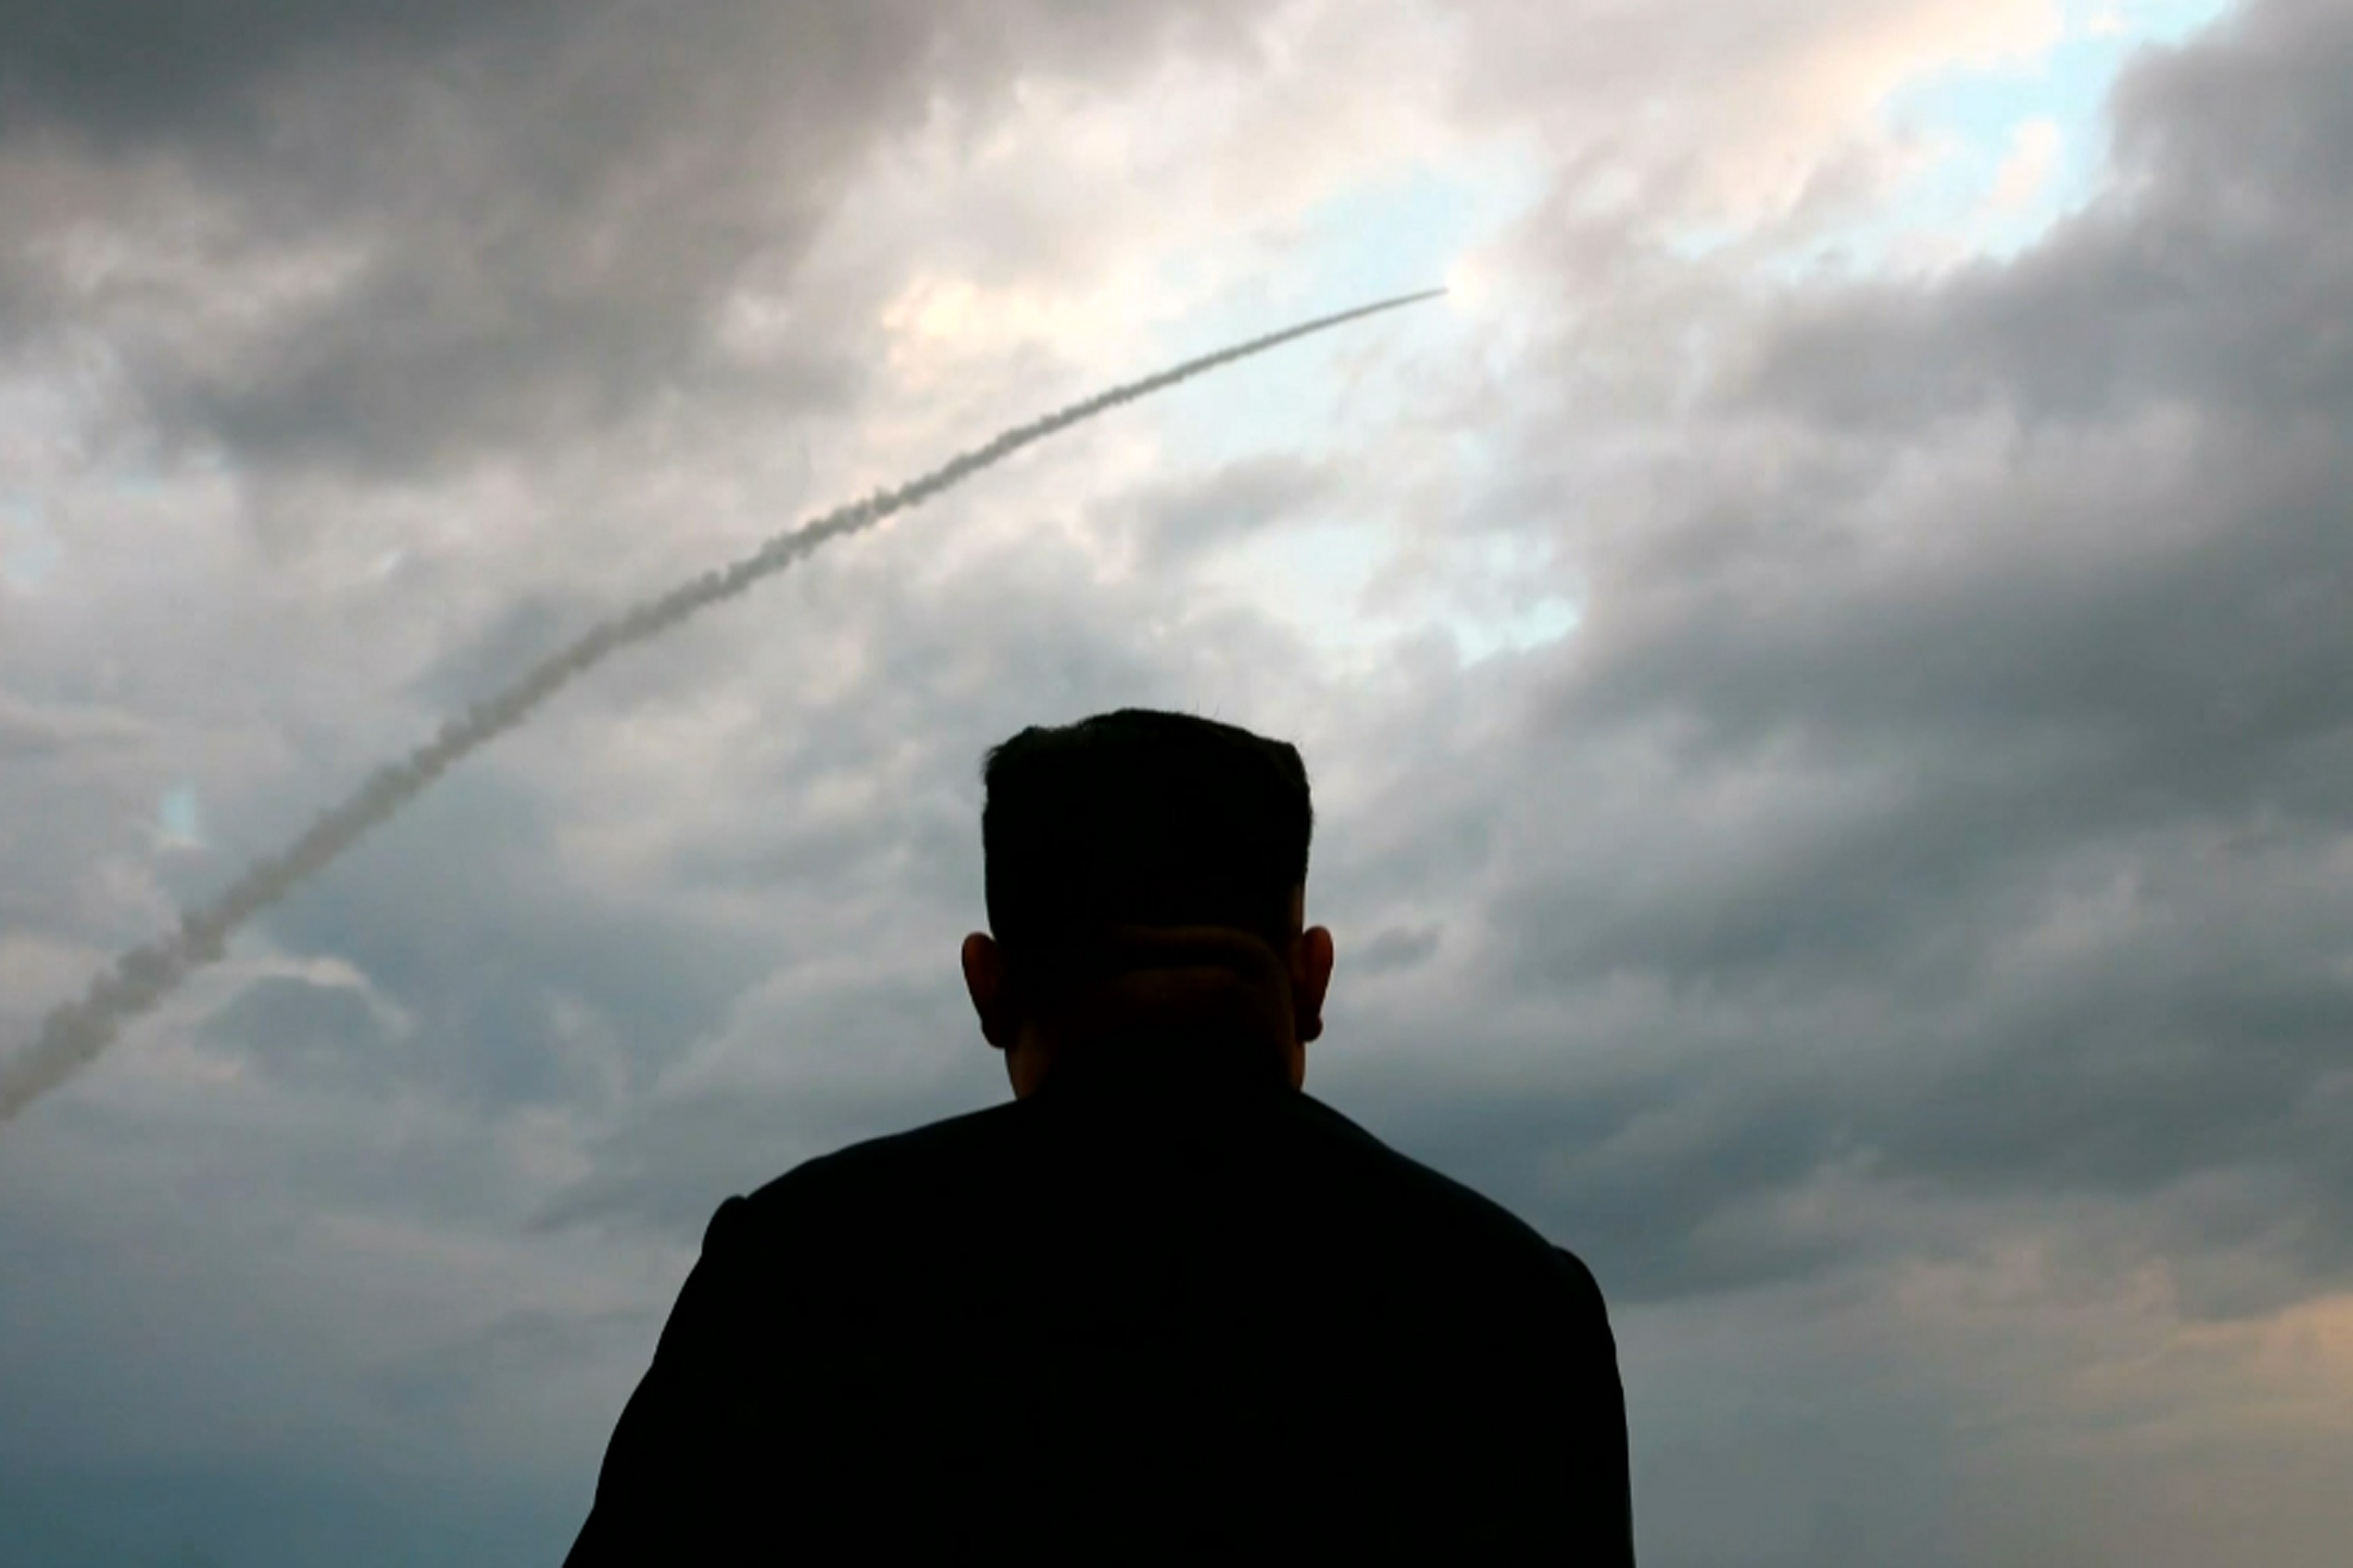 North Korean leader Kim Jong-un watches the launch of a ballistic missile on Wednesday. Photo: AFP/KCTV